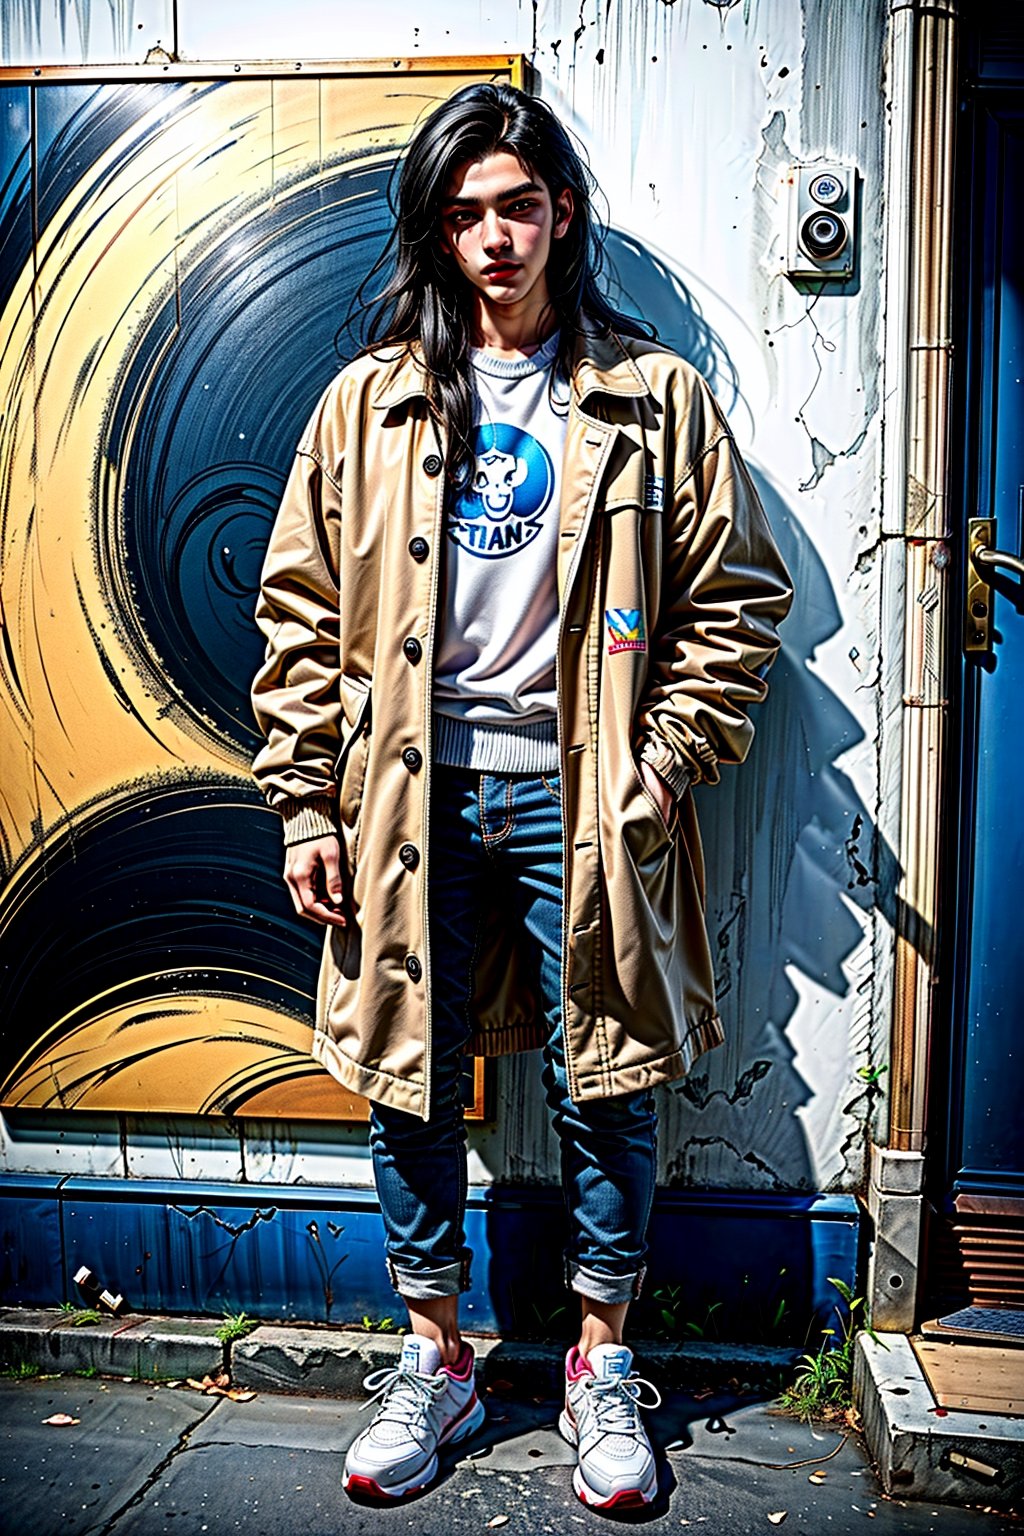 A handsome young man of 19 years old, with an athletic build. He has long black hair. He wears a black sweater, beige jacket, blue jeans, and sneakers. He has an urban and dangerous style. In the background an urban world, with a surreal and abstract style.,sciamano240,